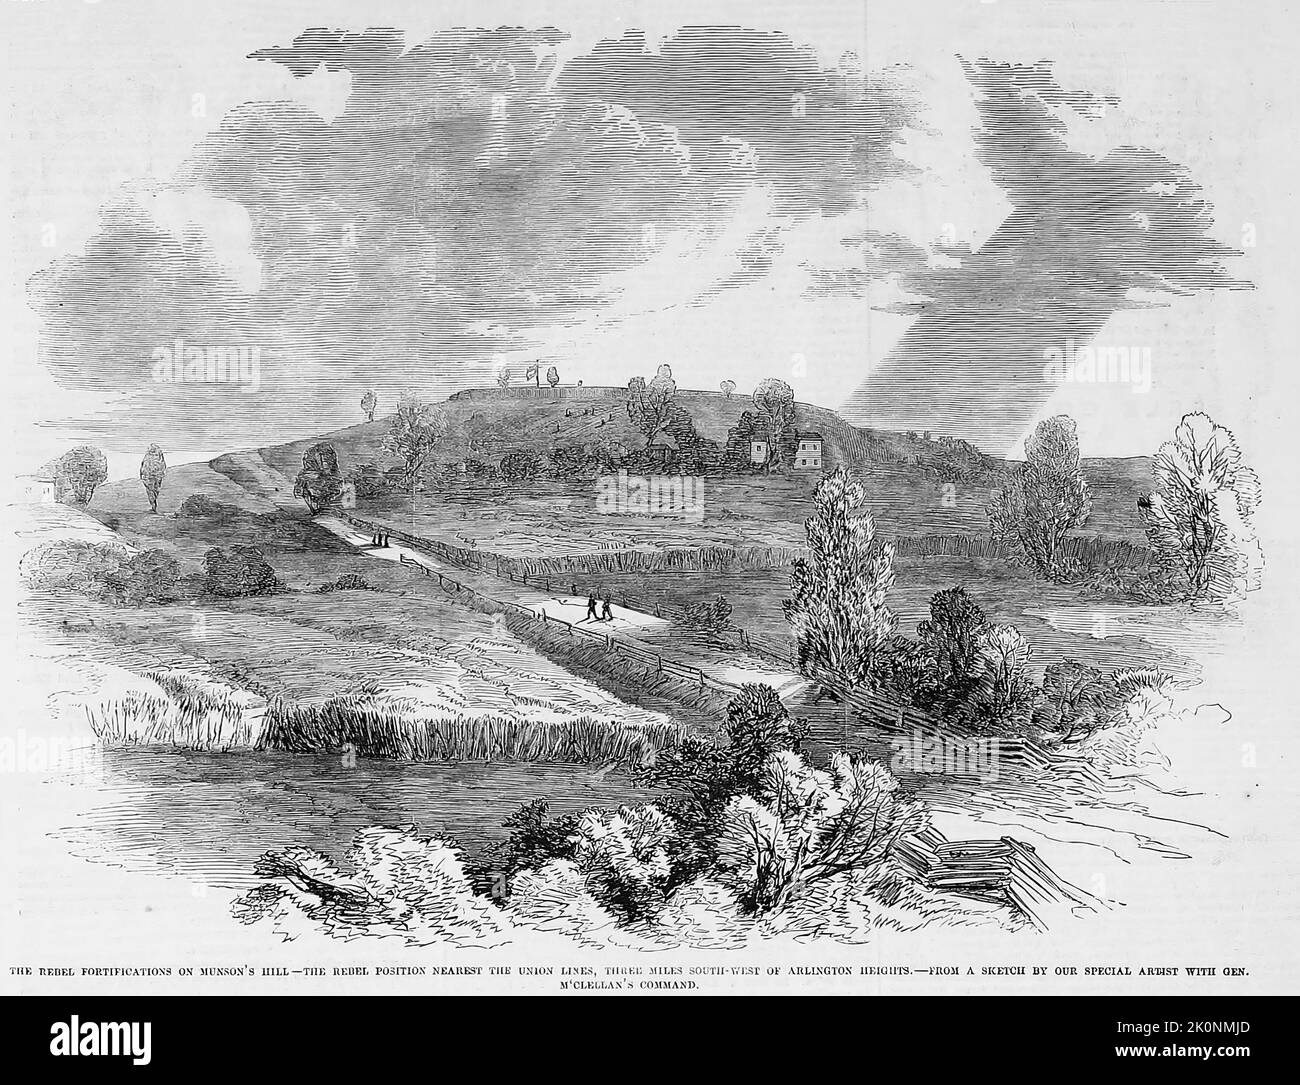 The Rebel fortifications on Munson's Hill - The Rebel position nearest the Union lines, three miles southwest of Arlington Heights, Virginia. September 1861. 19th century American Civil War illustration from Frank Leslie's Illustrated Newspaper Stock Photo